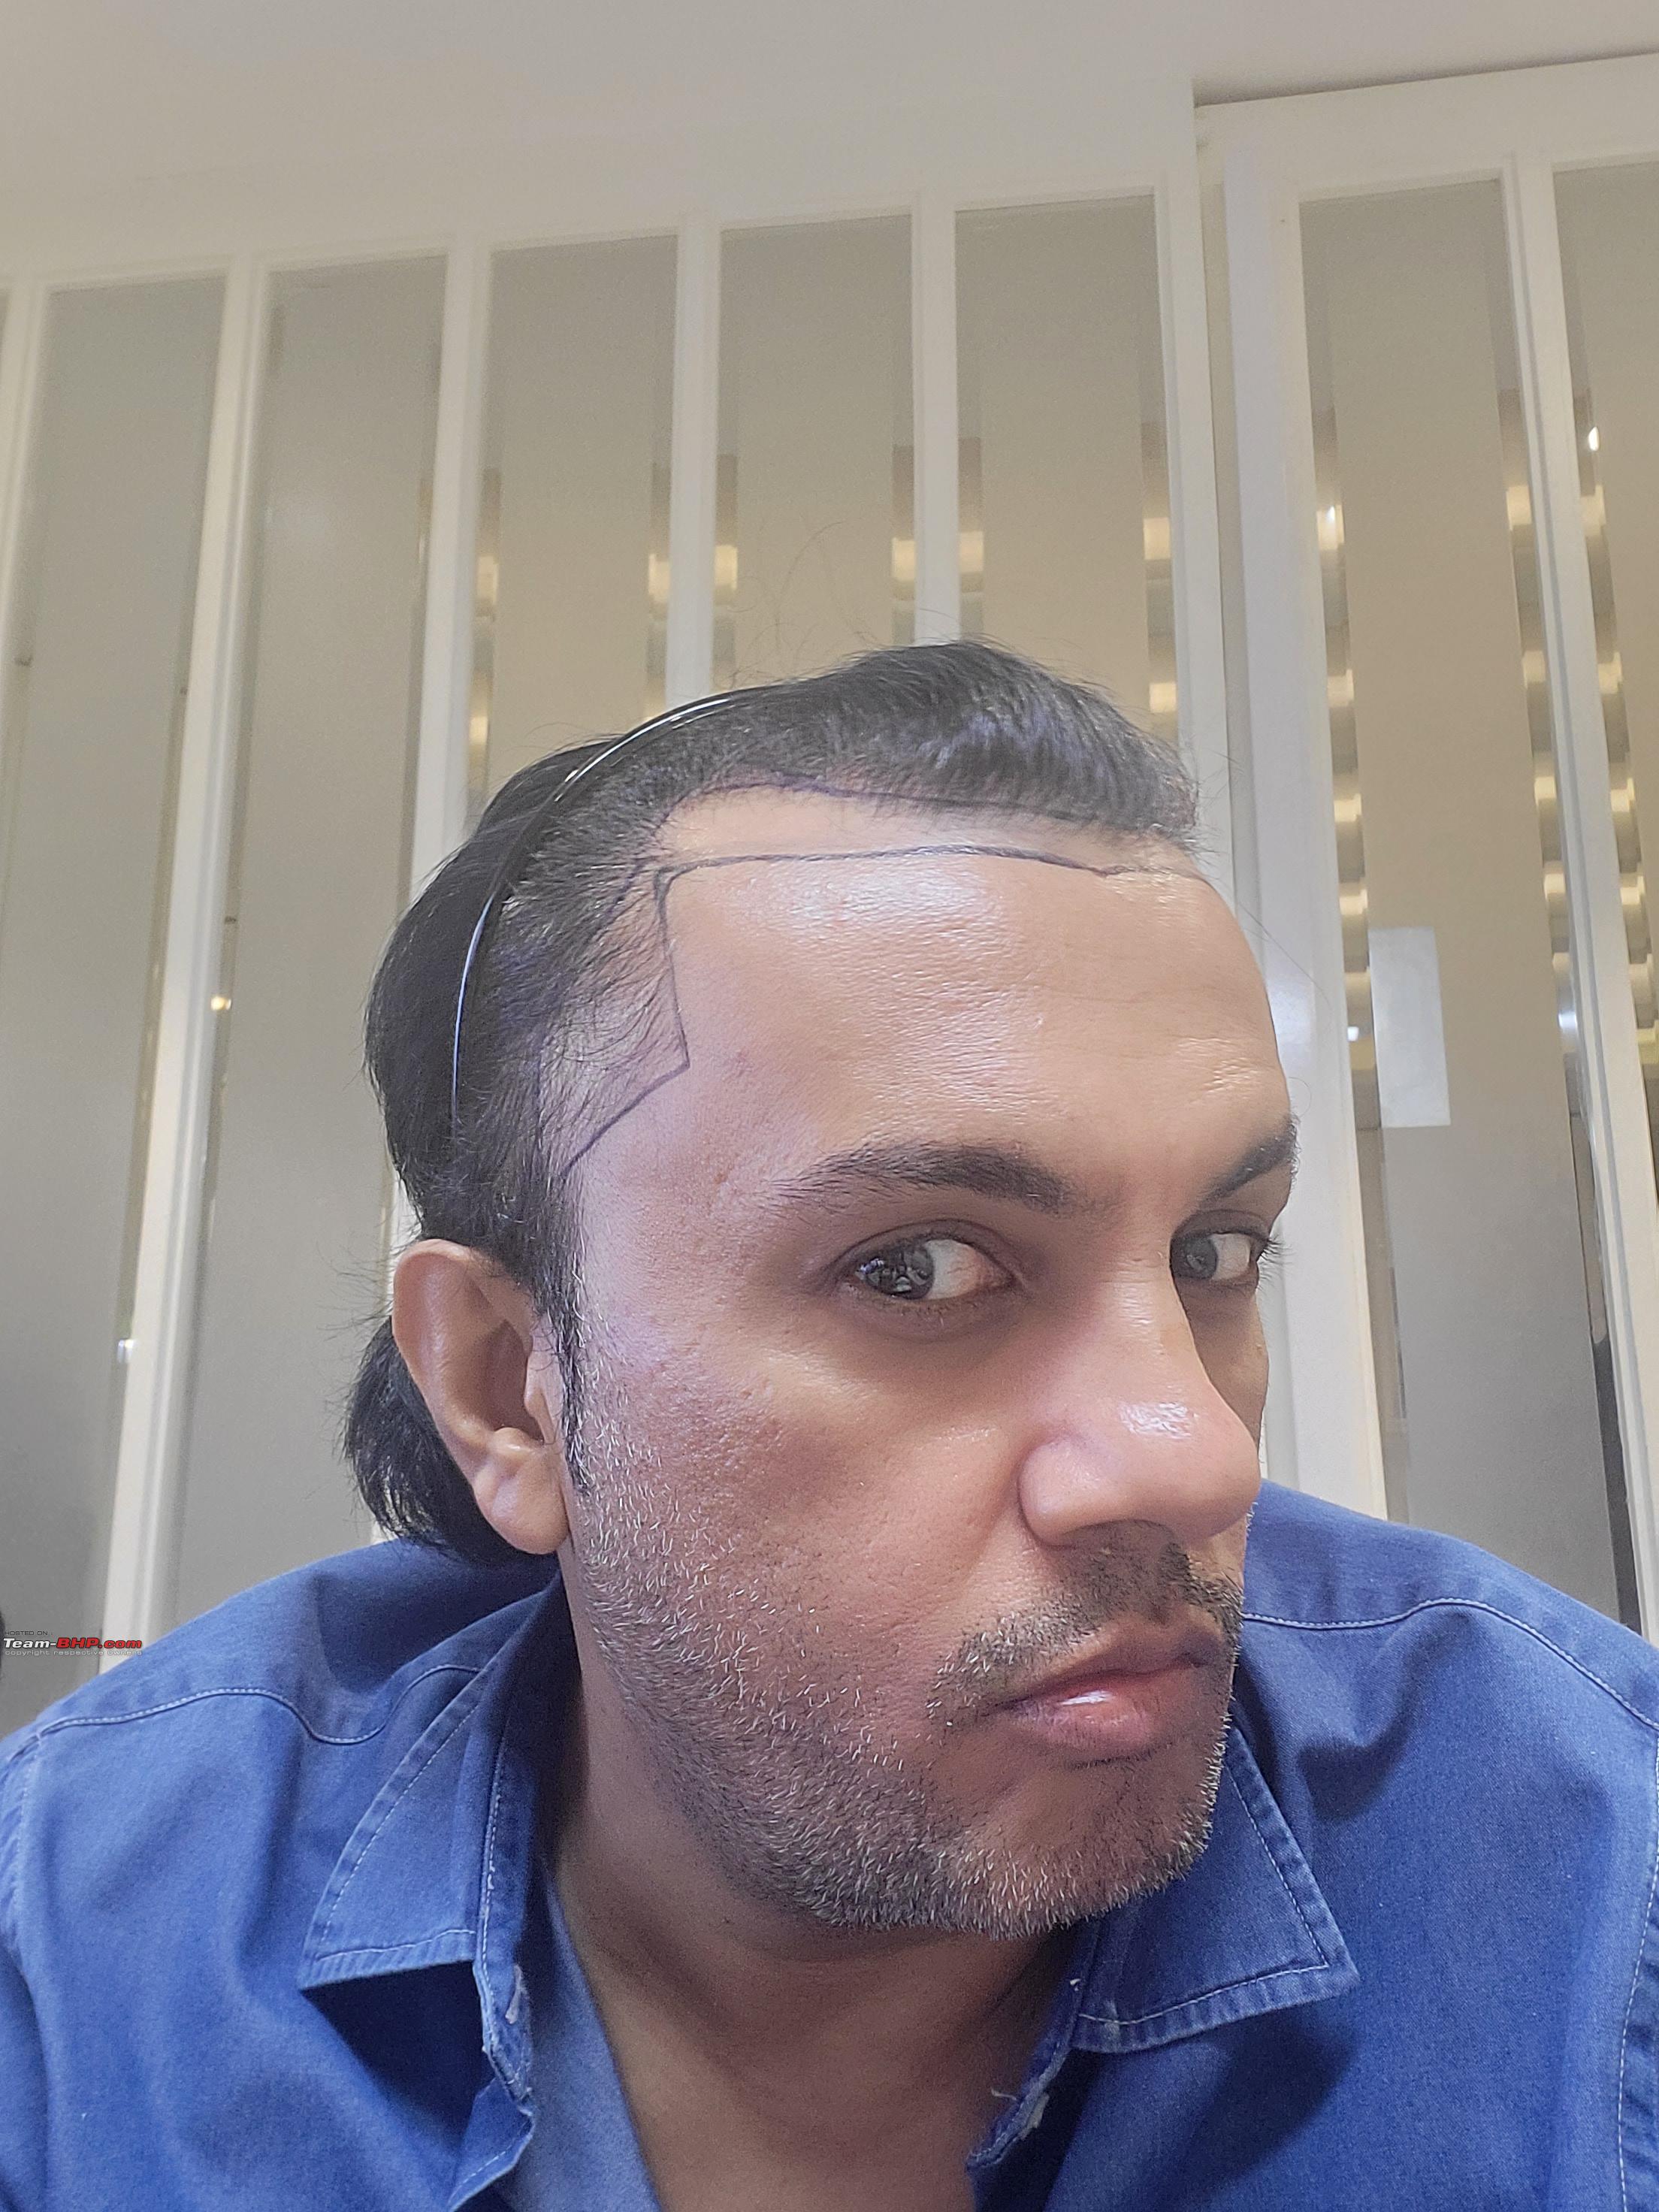 Best hair transplant clinic in Delhi NCR (Gurgaon)- Eugenix Hair Sciences |  Watch Mr Nitesh Ranjan share his experience and result after getting a hair  transplant surgery from Eugenix Hair Sciences. Eugenix